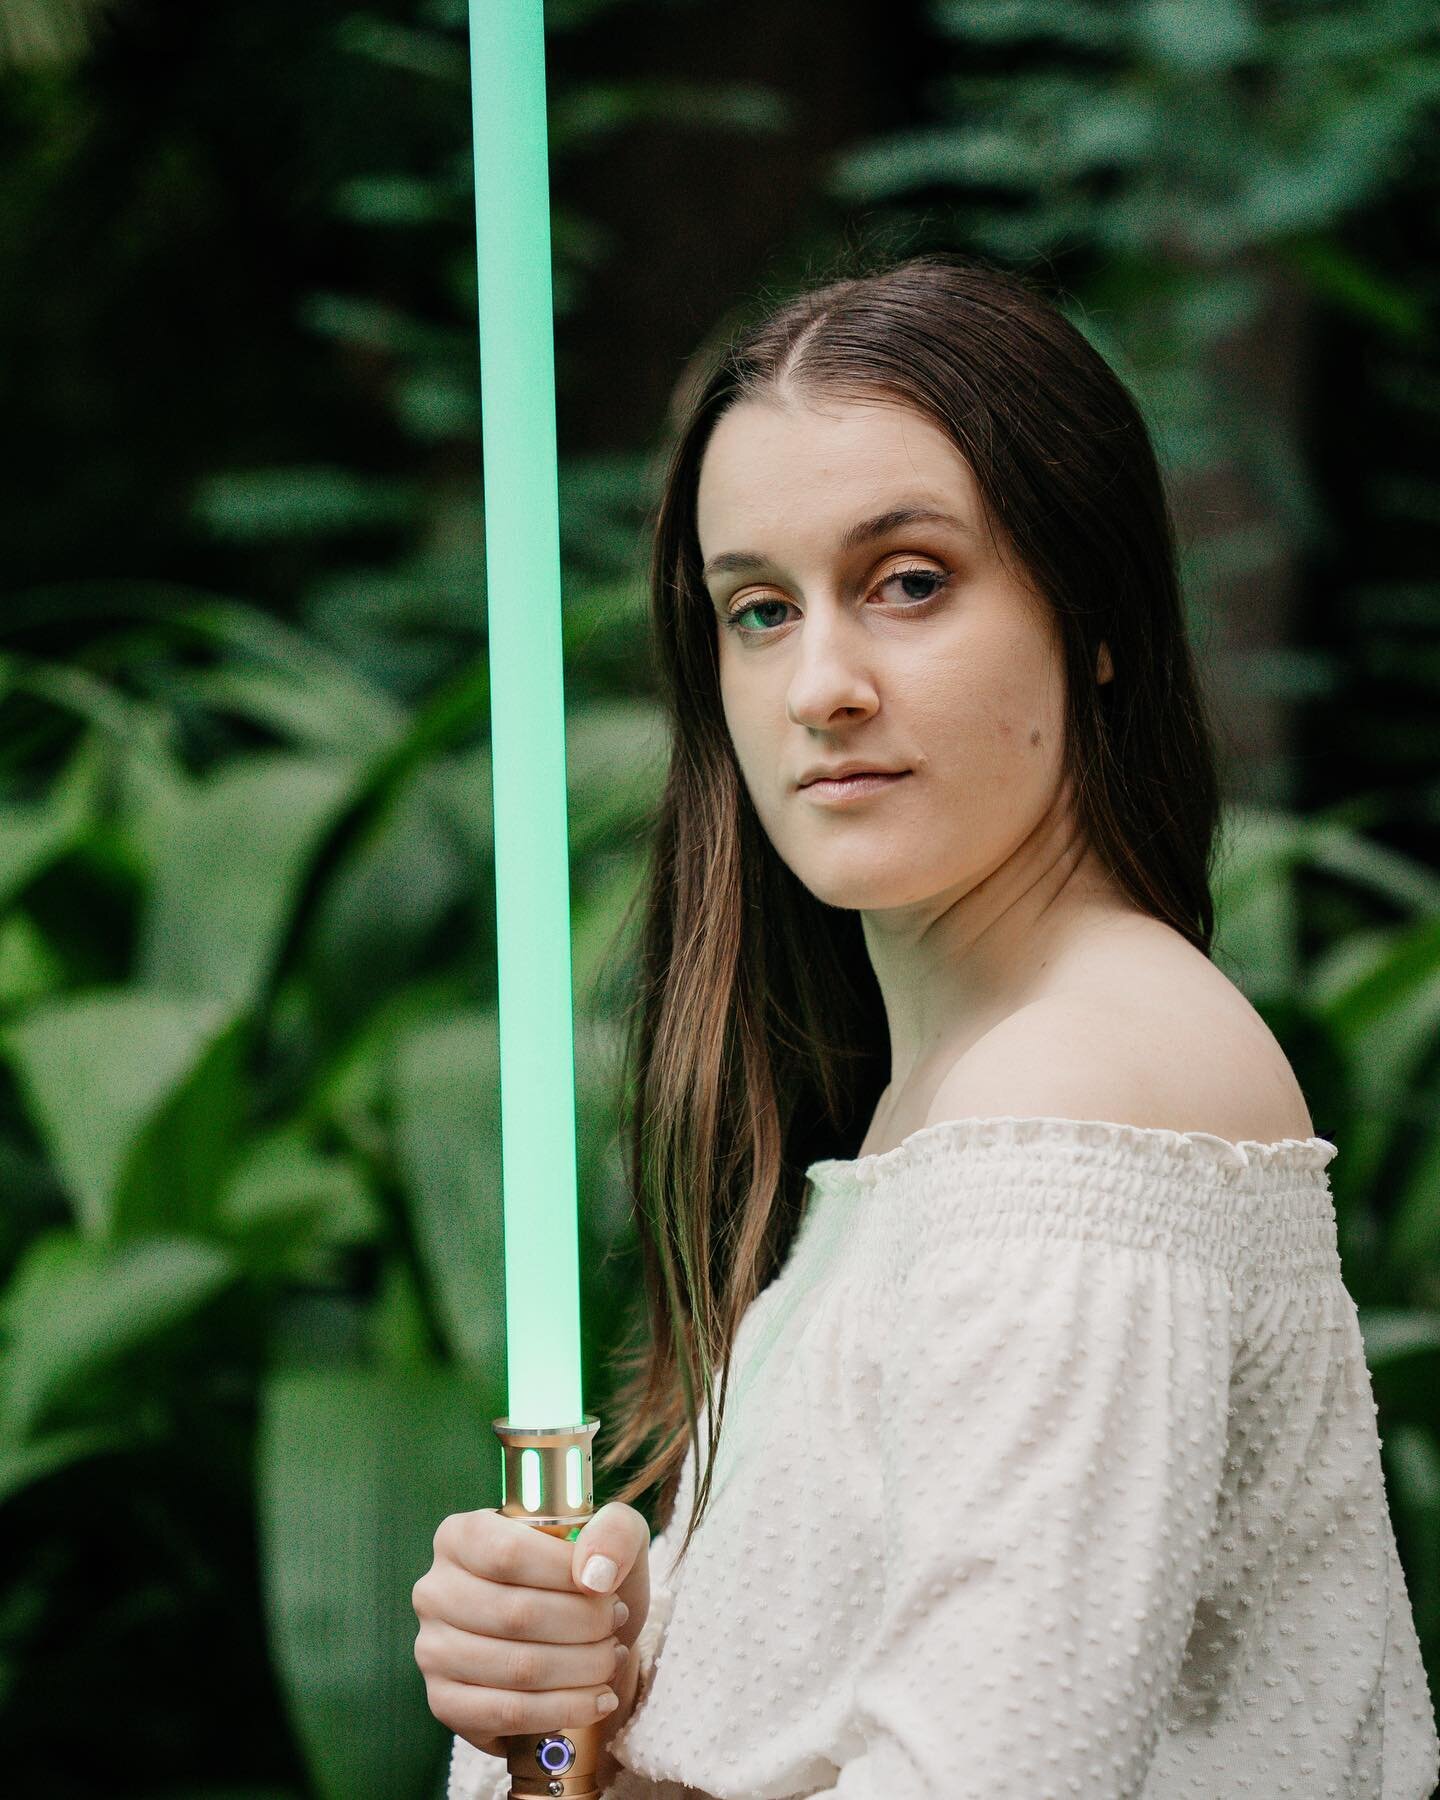 May the Fourth be with You!!✨

Behold, my most favourite photoshoot I&rsquo;ve EVER done! If you know me, you know I love Star Wars more than anything on this Earth, so to do this photoshoot made me jump for joy with excitement! To feel like I was a 